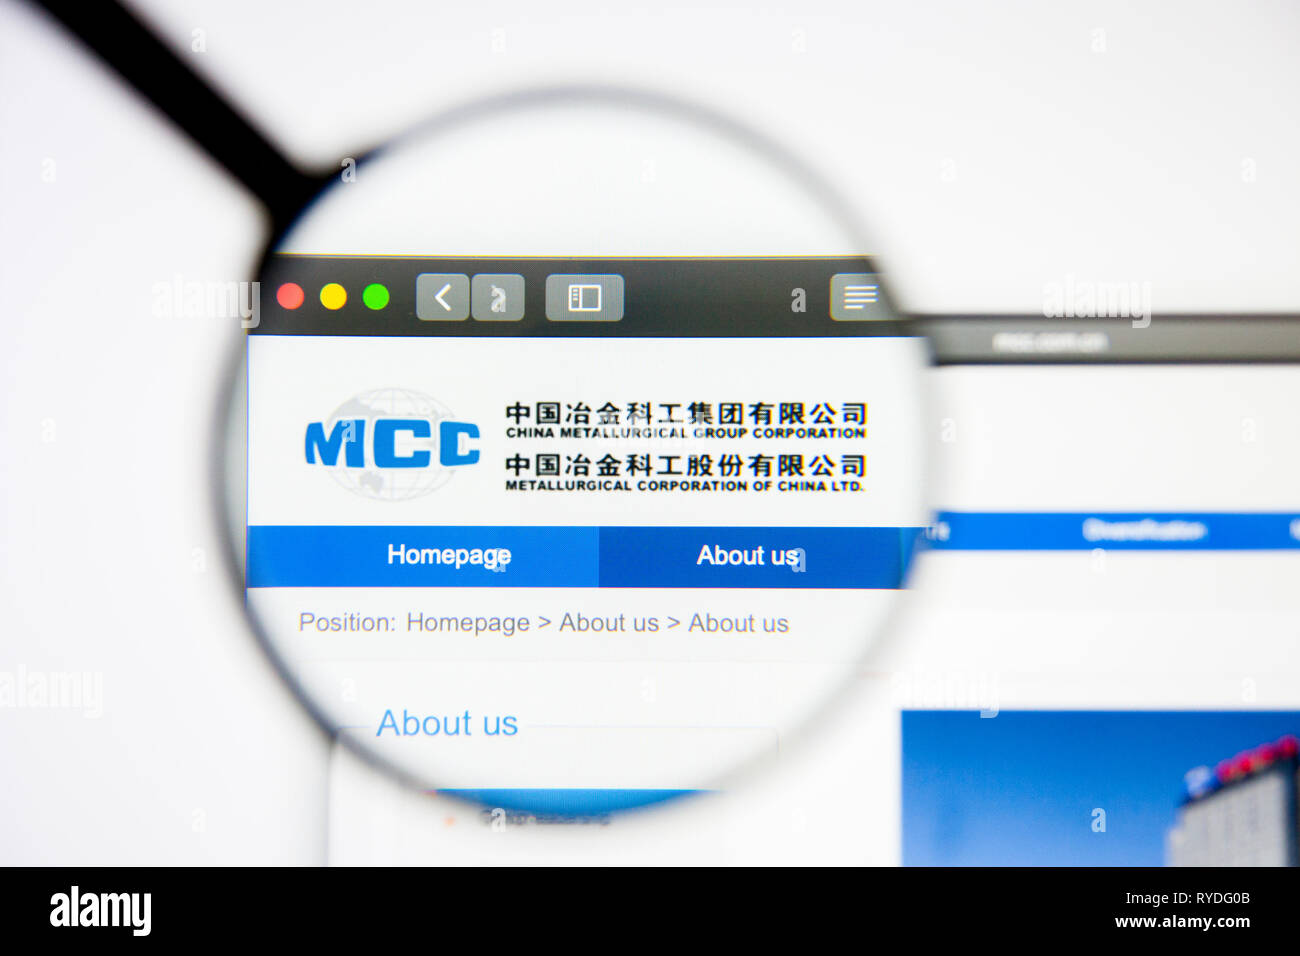 Los Angeles, California, USA - 5 March 2019: Metallurgical Corp of China website homepage. Metallurgical Corp of China logo visible on display screen Stock Photo